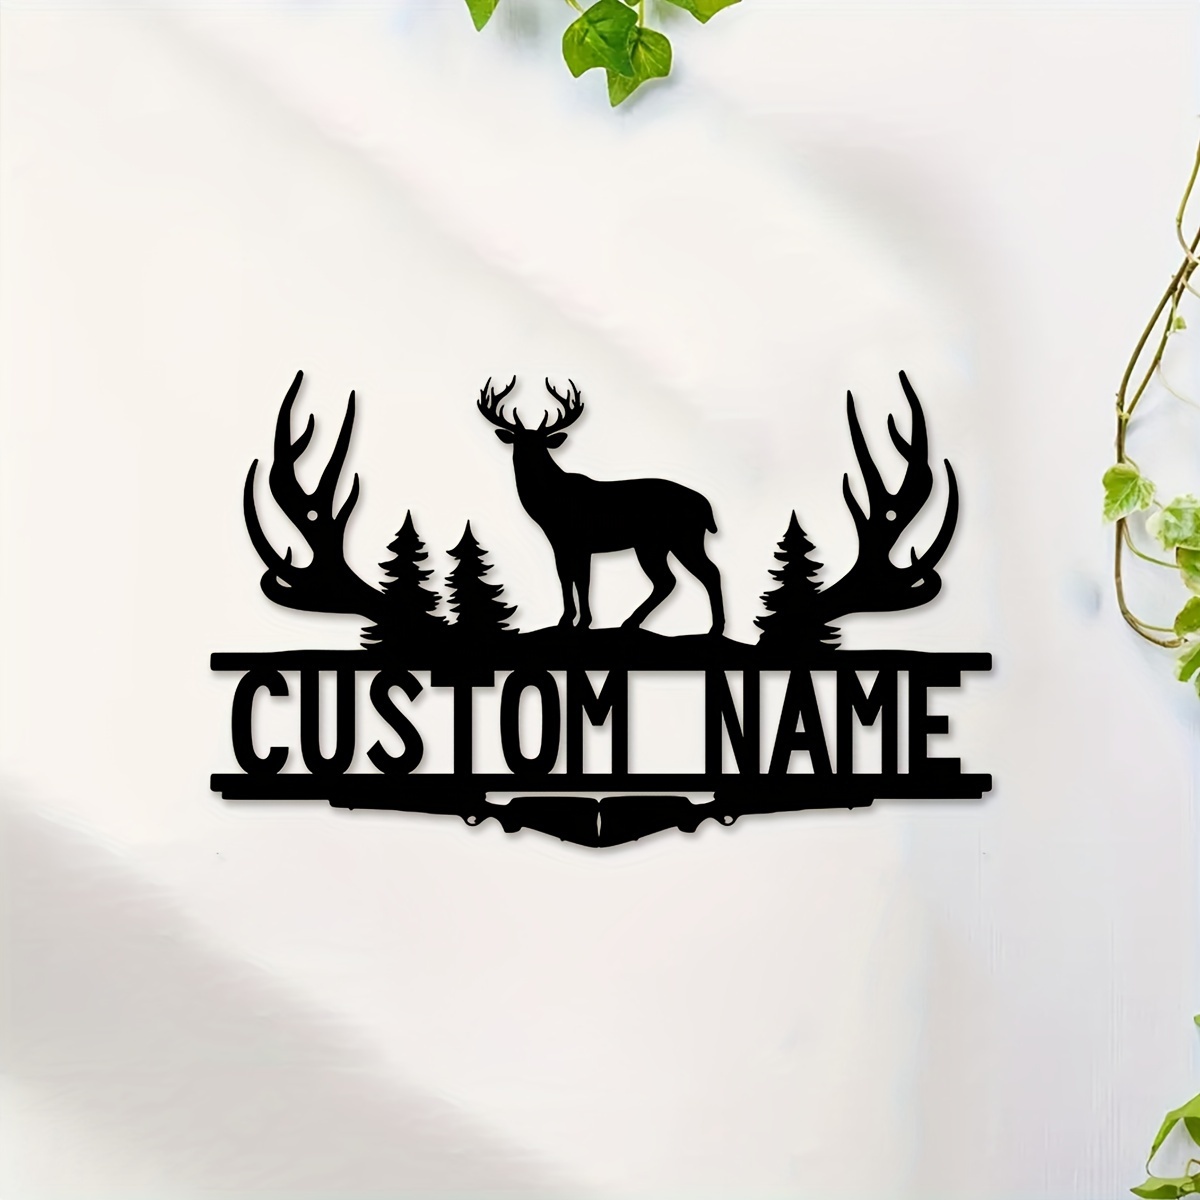 

1pc Custom Deer And Antler Metal Wall Art, Personalized Deer And Antler Signs, Farmhouse Wall Deer And Antler Decor, Metal Art For Living Room, Living Room Office Decor, Custom Name